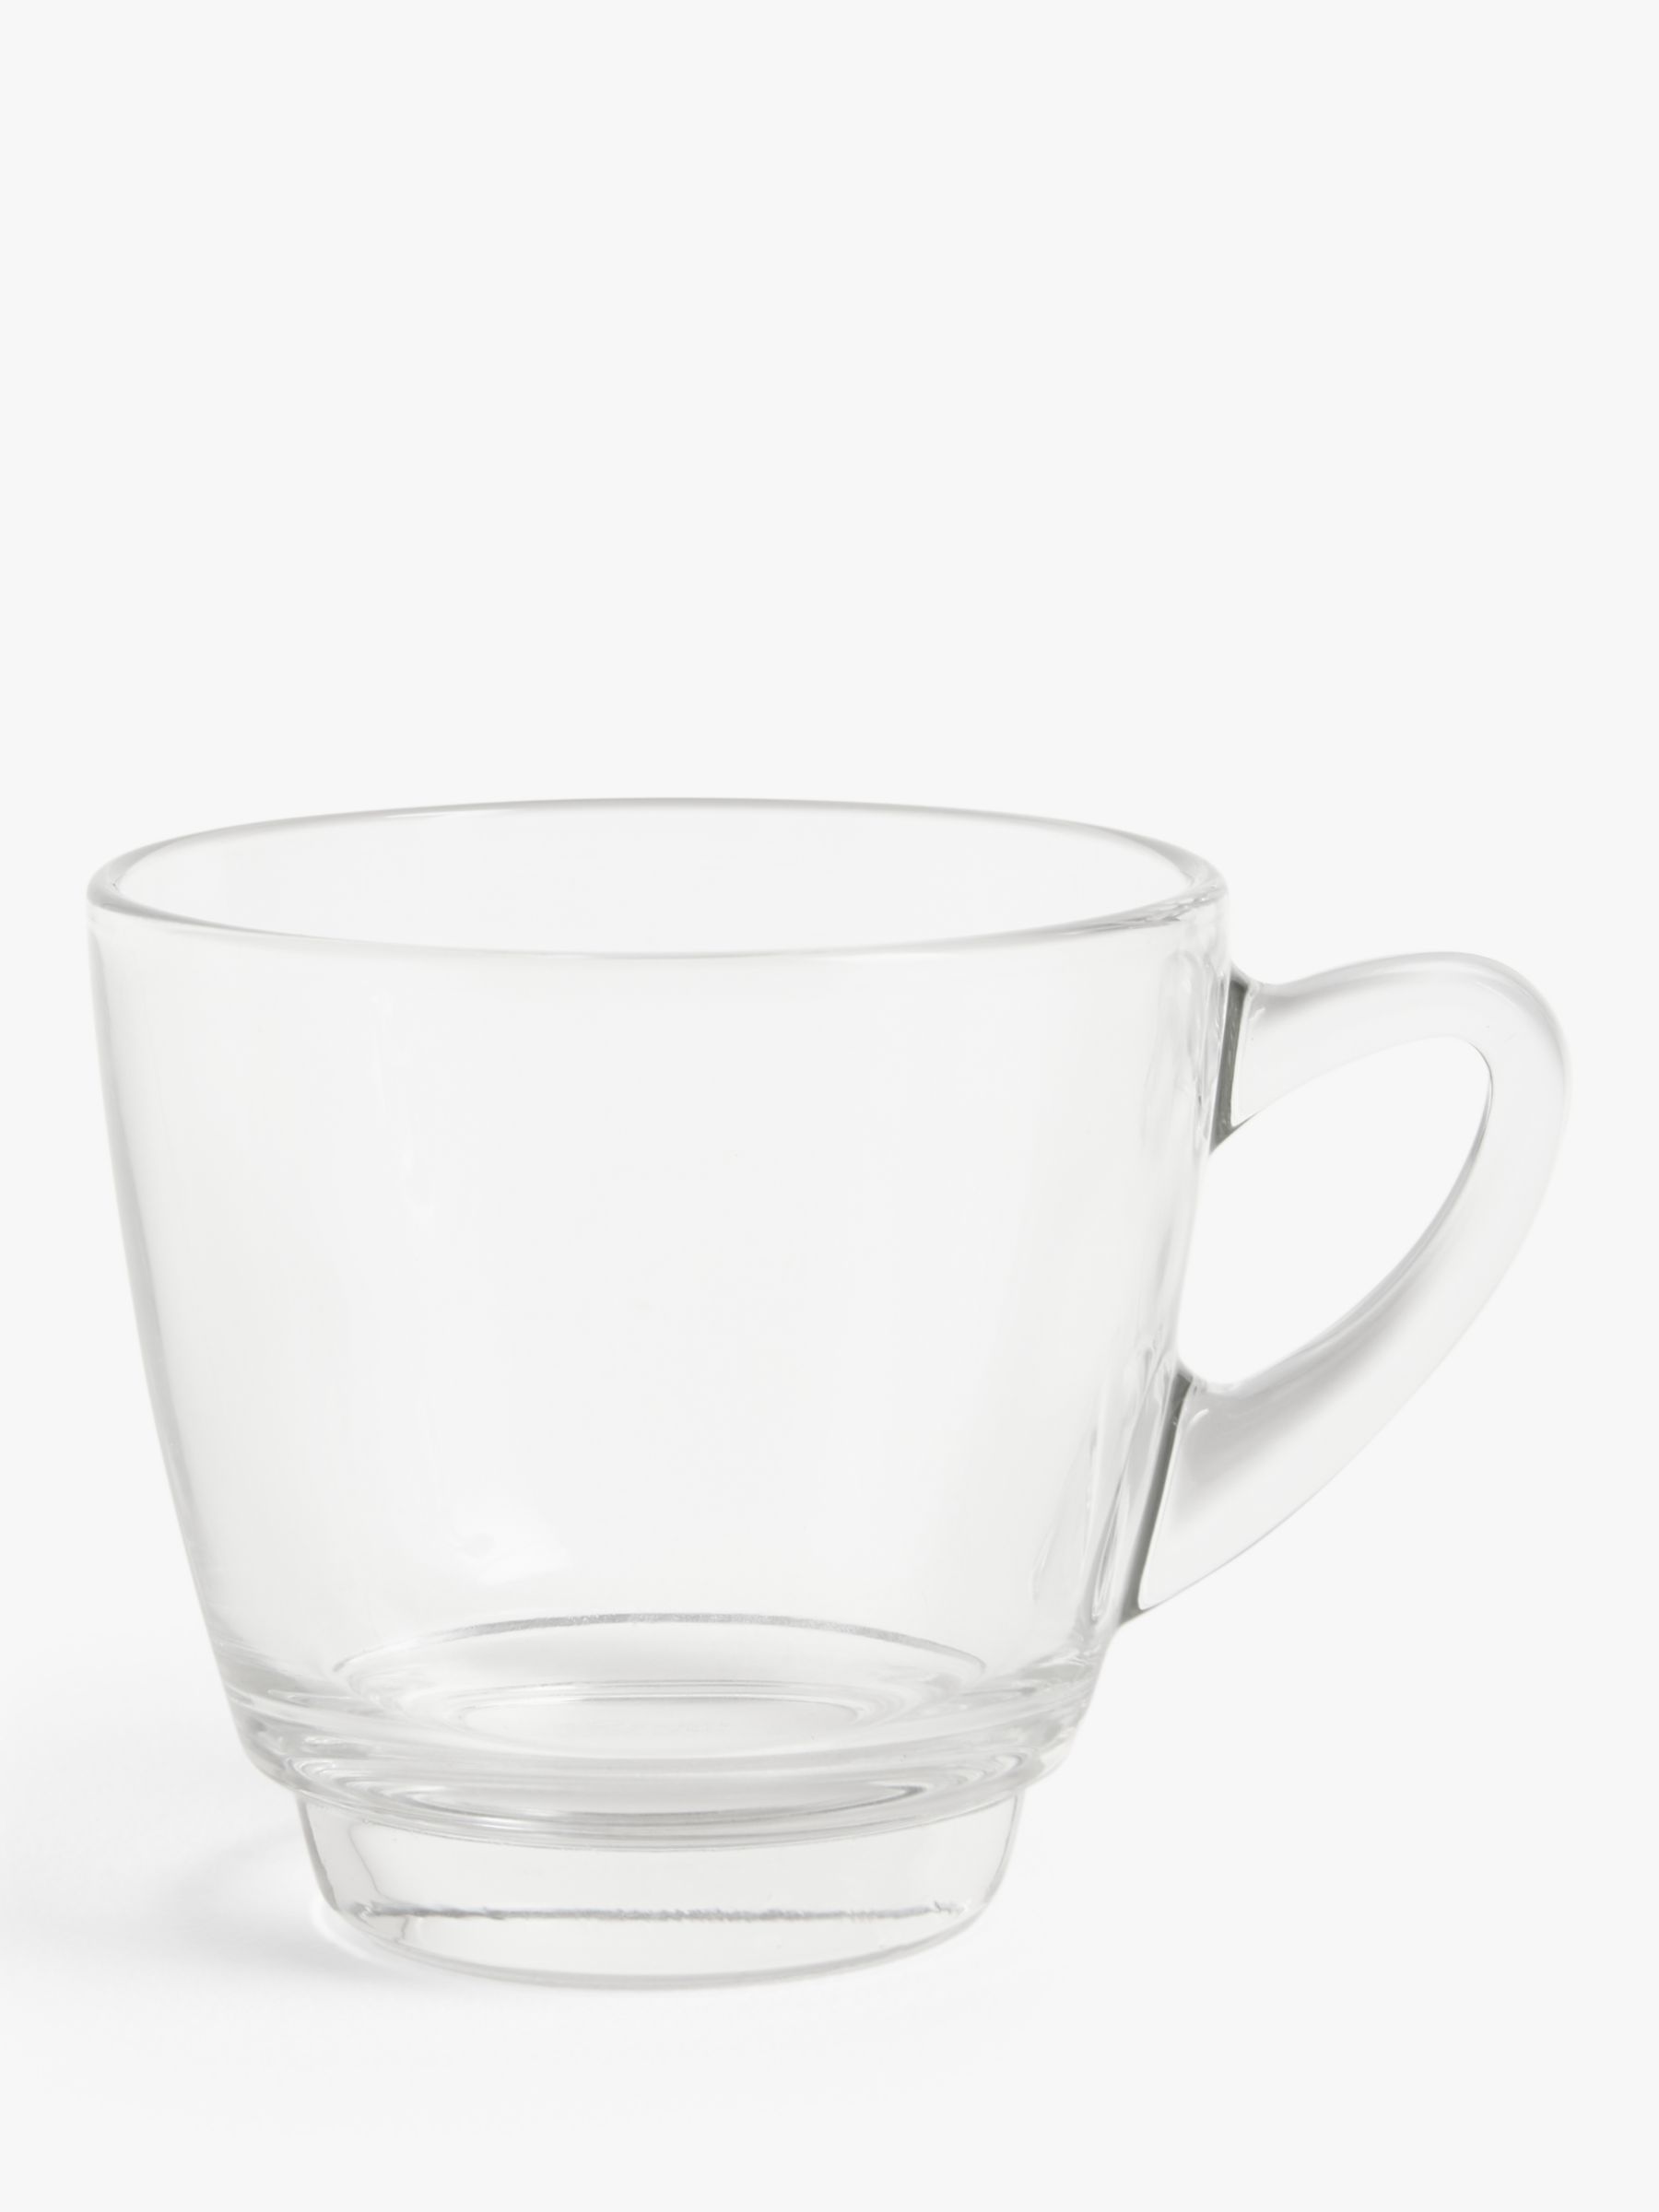 John Lewis ANYDAY Coffee Connoisseur Glass Americano Cups, Set Of 2, 320ml, Clear